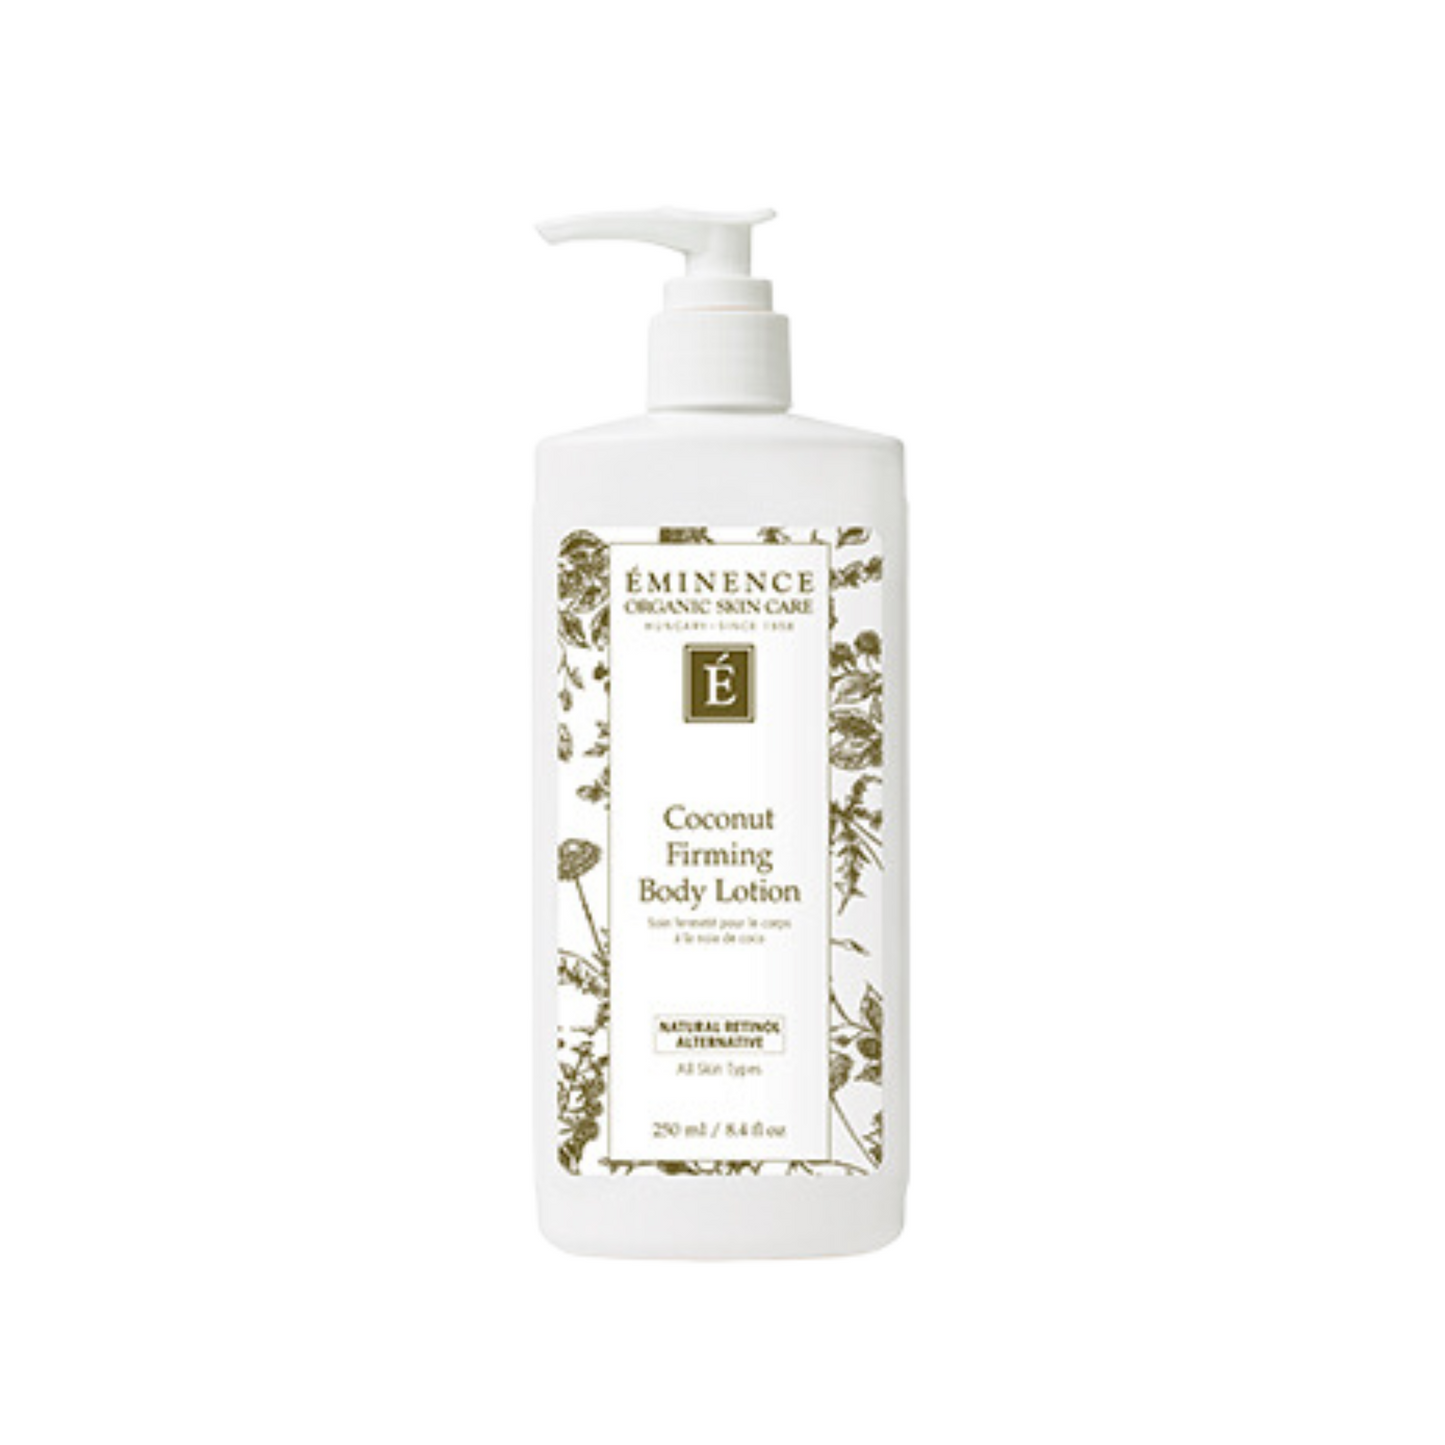 Coconut Firming Body Lotion - Eminence Organic Skin Care